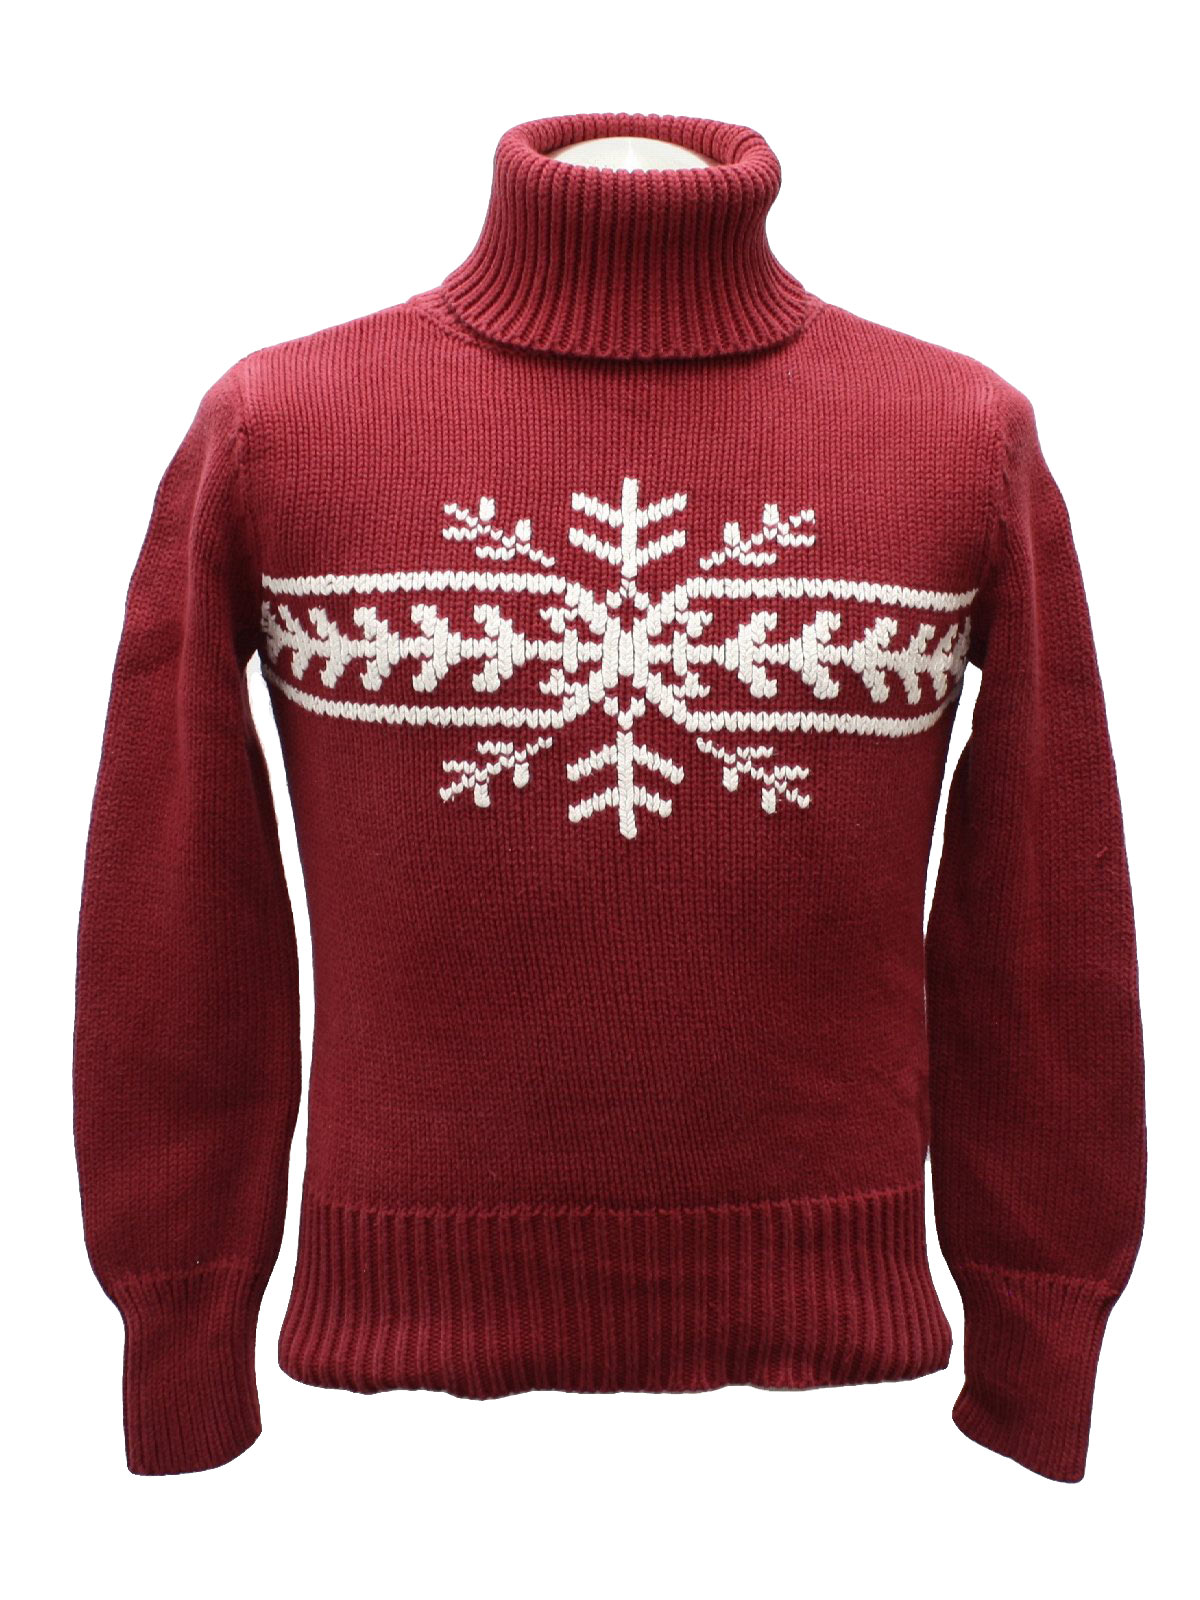 Womens Ugly Christmas Sweater: -Tommy Hilfiger- Womens or Girls wine and off white banded snowflake design ramie and pullover, longsleeve optional roll back cuffs ugly Christmas sweater with turtle neckline